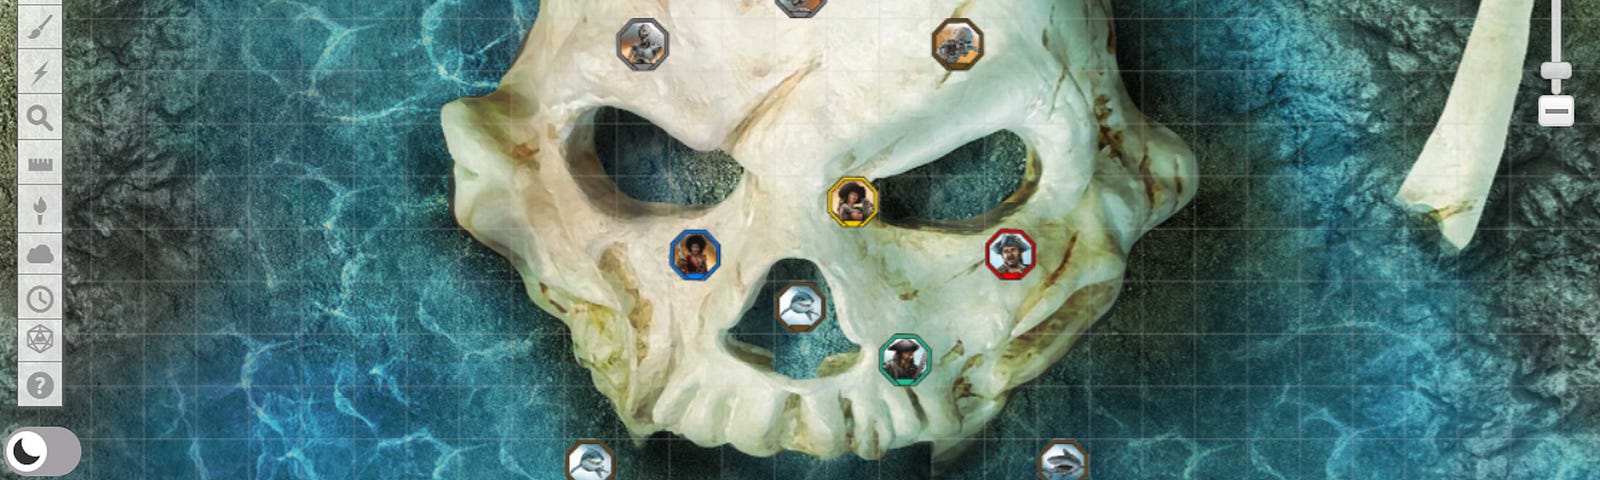 A skull in the middle of water on a Roll20 grid with tokens.